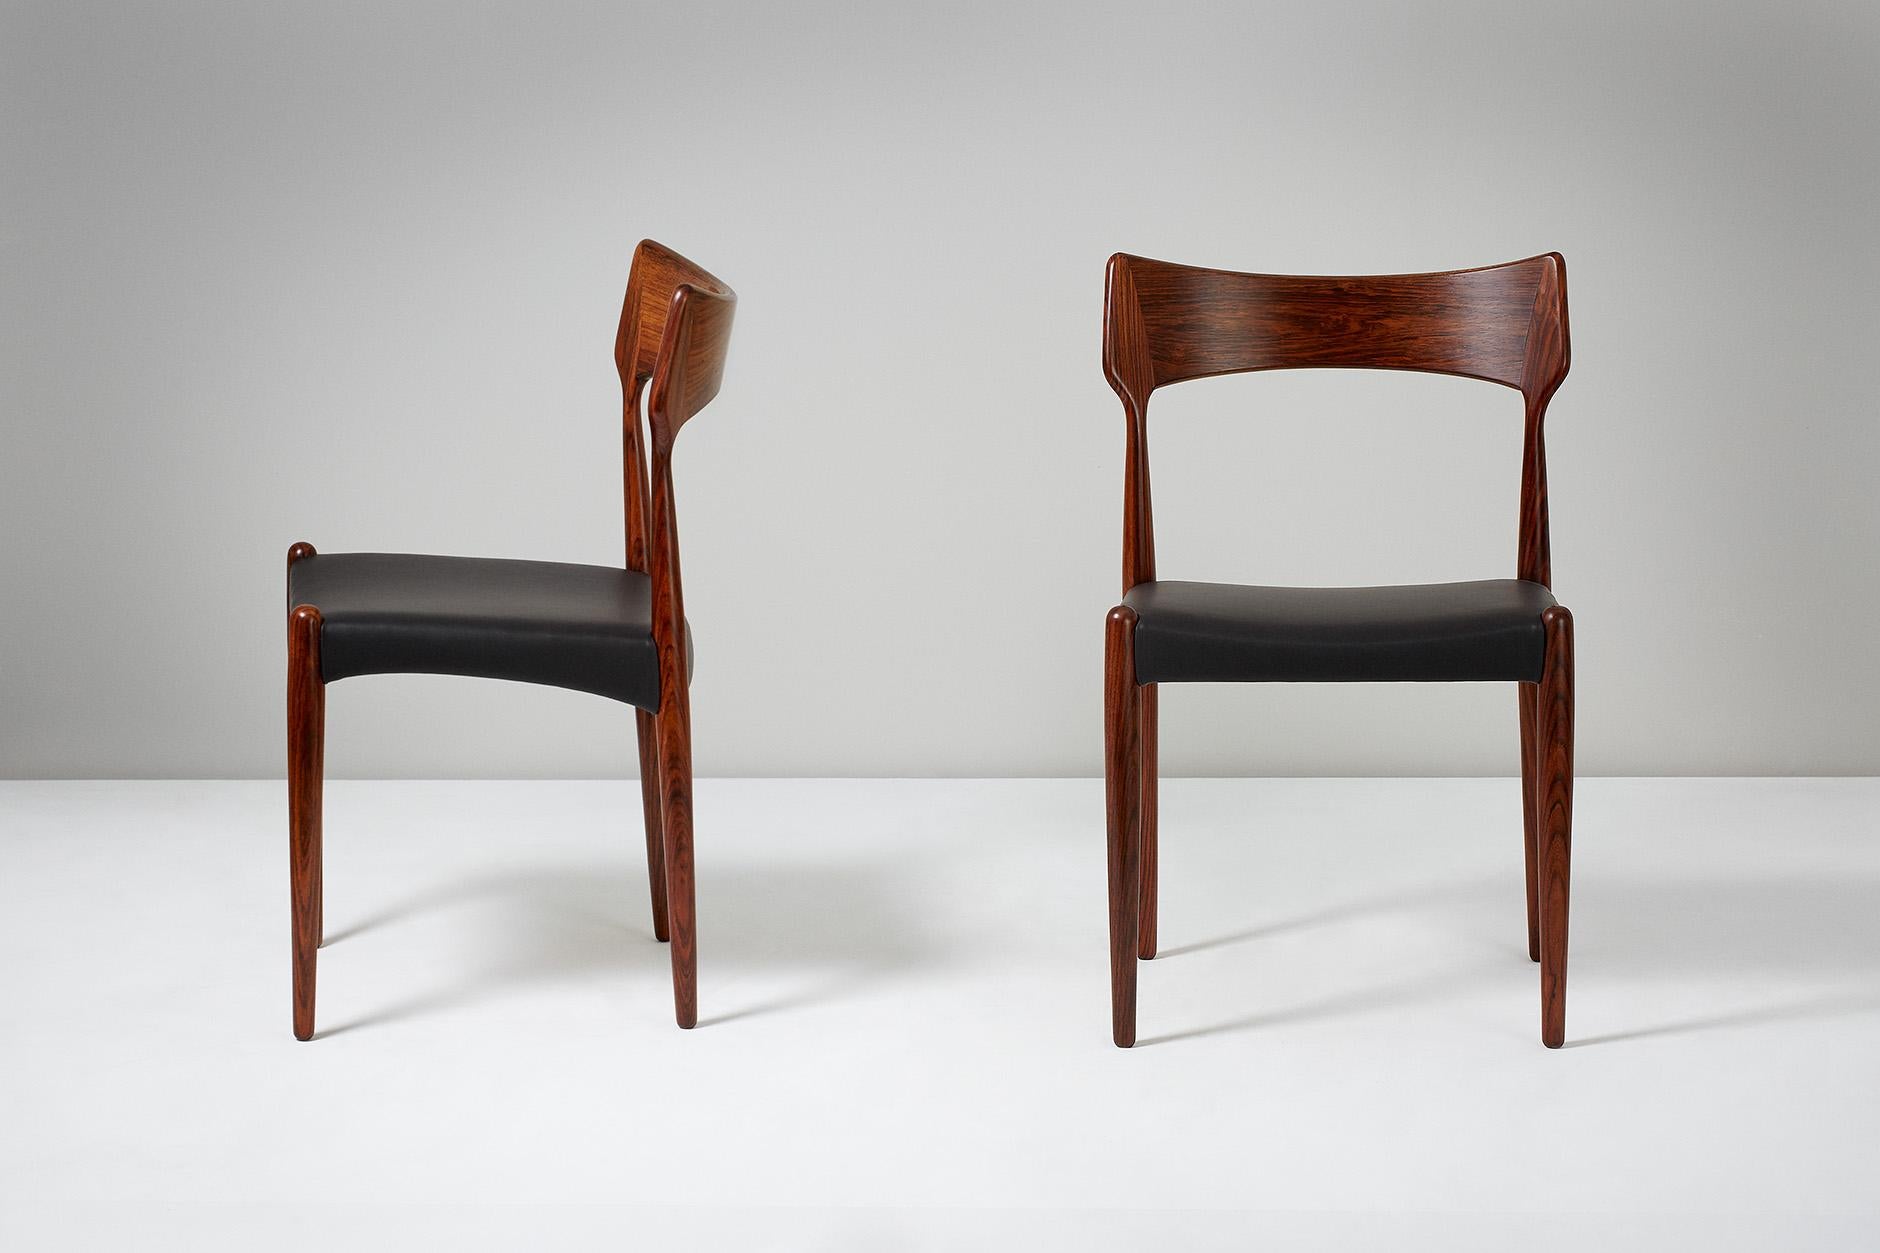 Bernard Petersen - Dining Chairs, circa 1960

Set of 6 rosewood dining chairs produced by Christian Linnebergs Møbelfabrik, Denmark and designed by Bernard Petersen. The seats have been reupholstered in aniline black leather and the rosewood frames